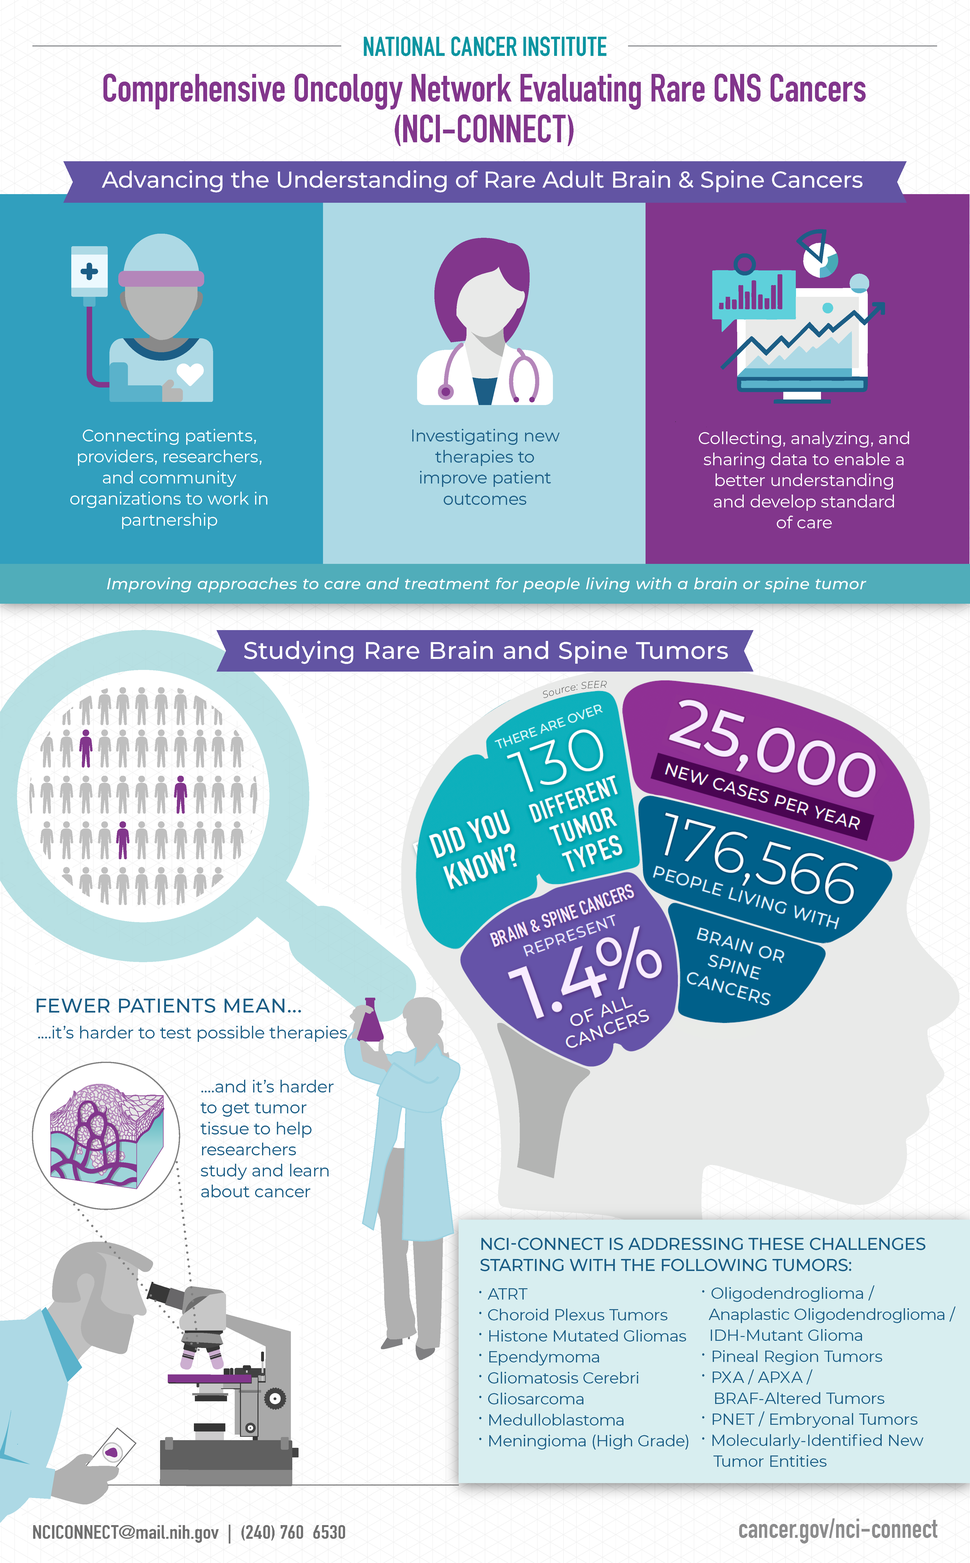 Infographic titled: “National Cancer Institute, Comprehensive Oncology Network Evaluating Rare CNS Cancers (NCI-CONNECT).” Information on the importance of advancing our understanding of CNS tumors, statistics, and the tumor types that NCI-CONNECT focuses on.